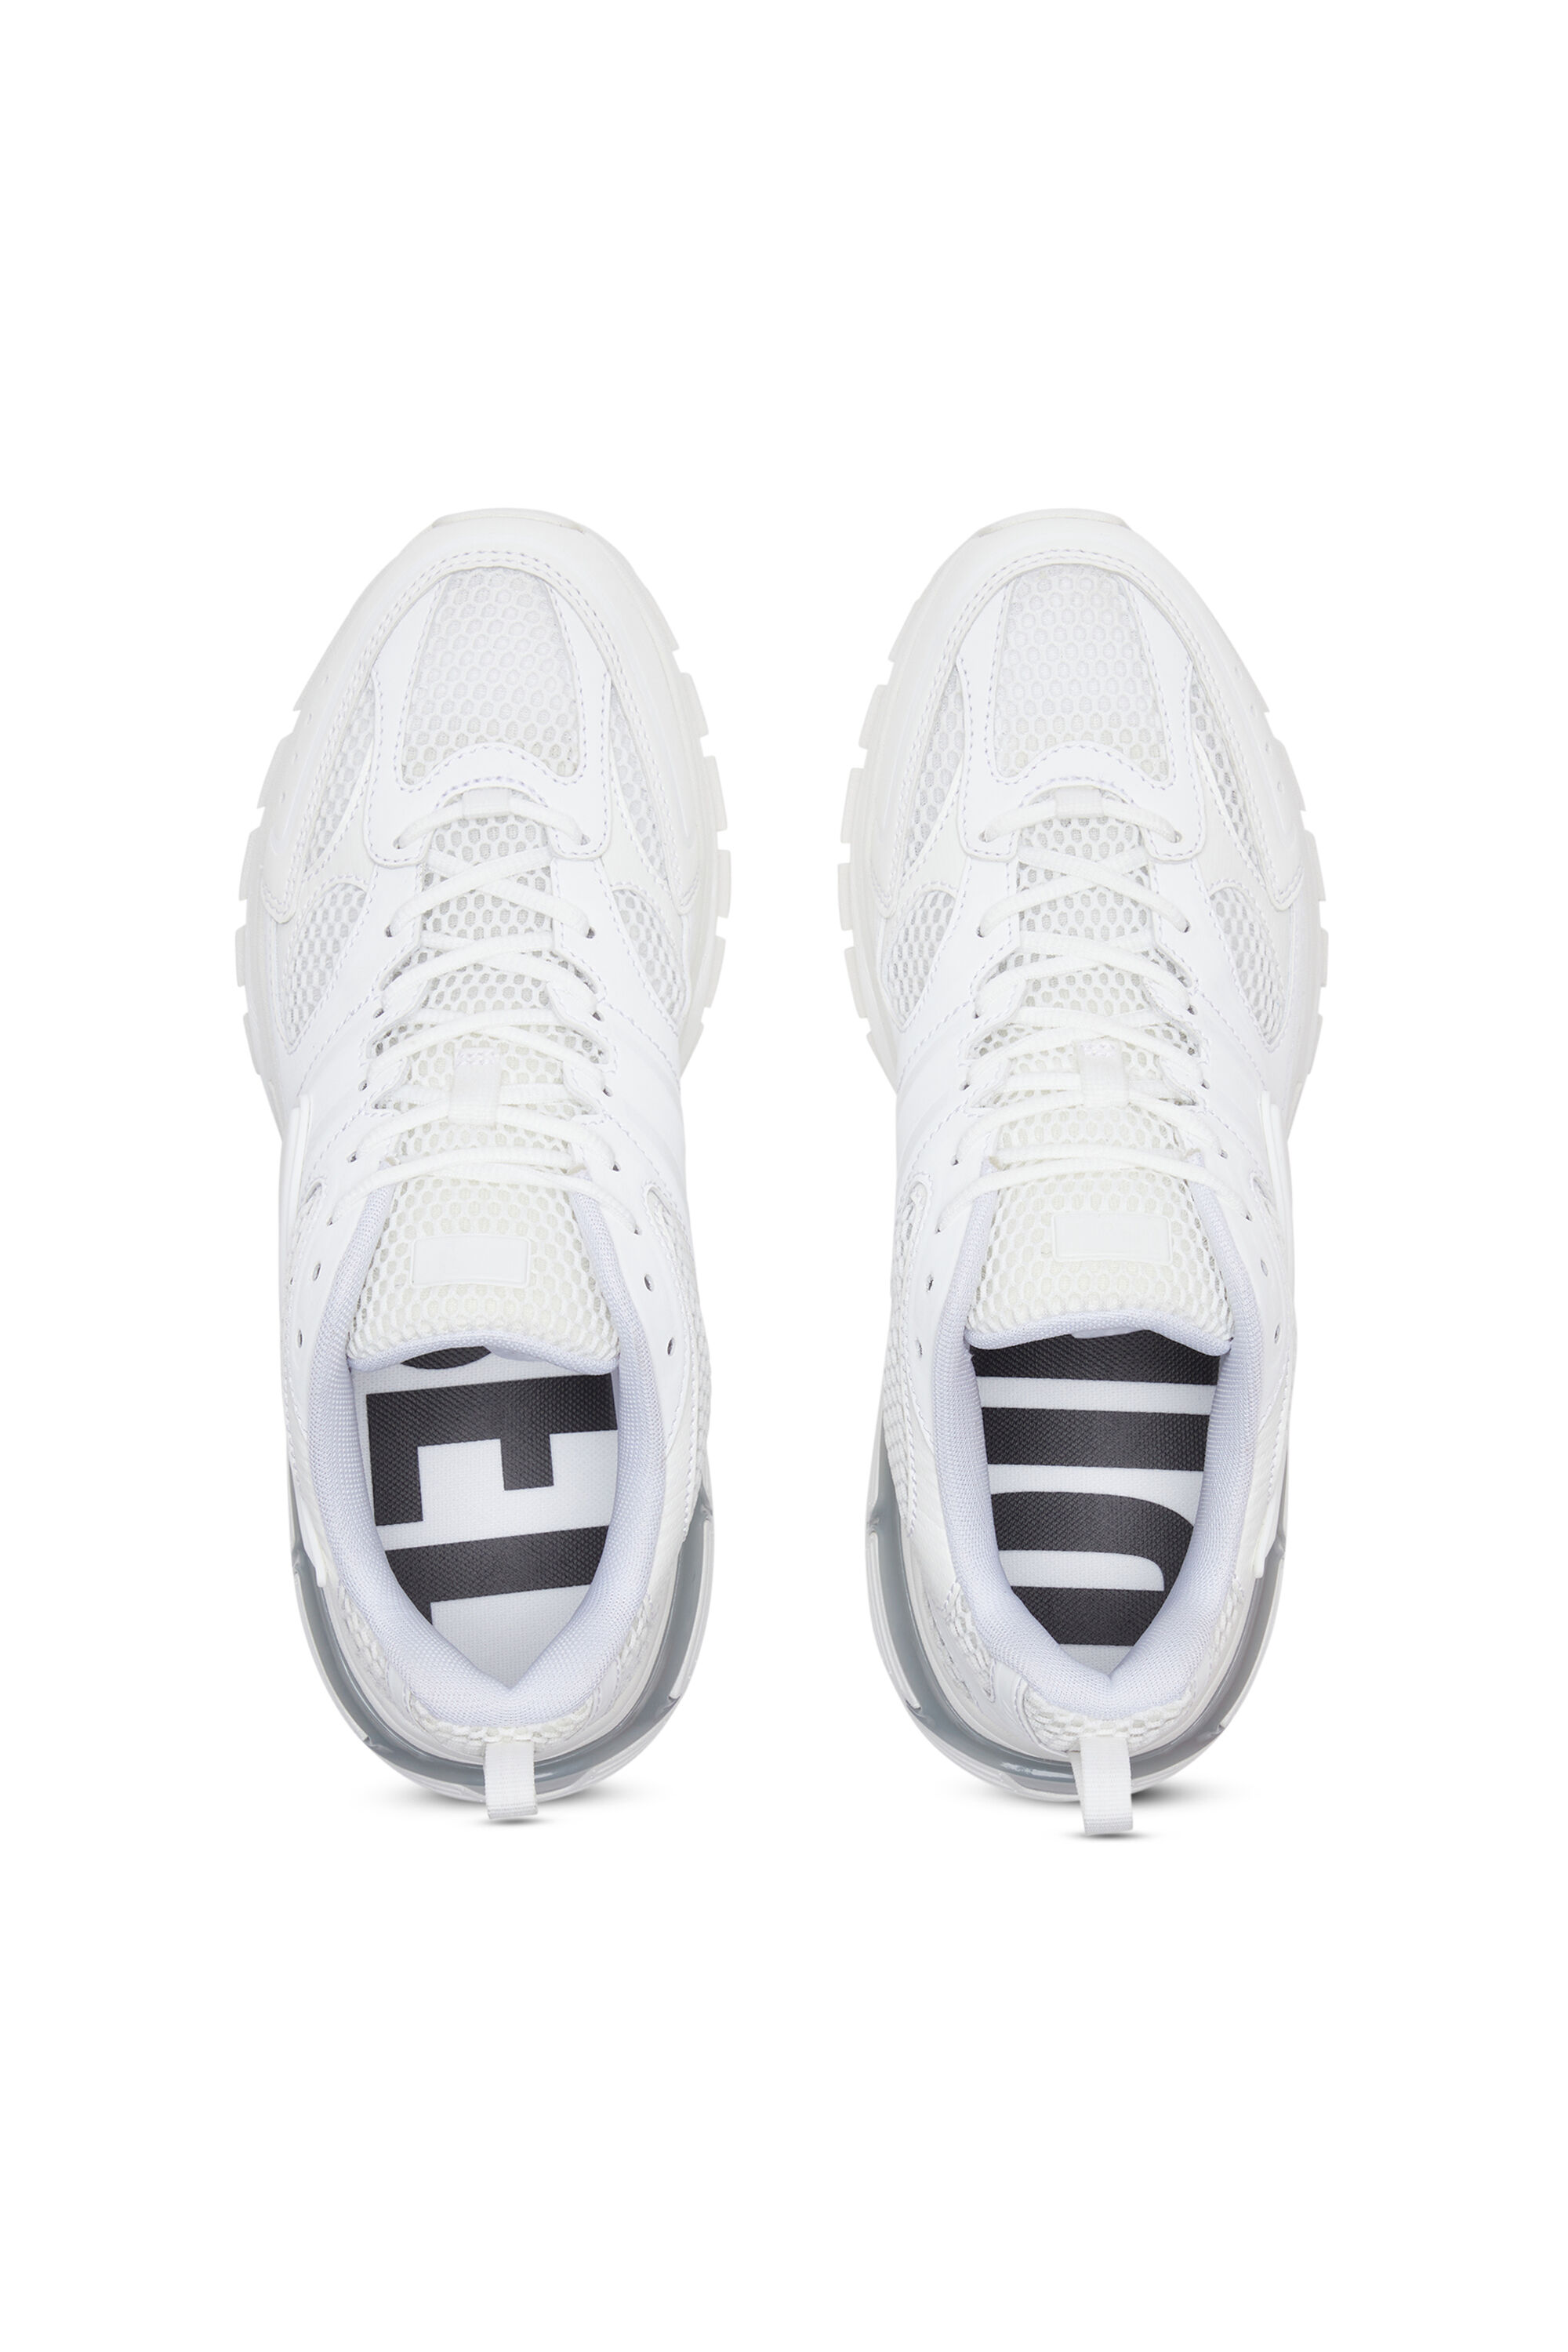 Diesel - S-SERENDIPITY PRO-X1, Man S-Serendipity Pro-X1 - Mesh sneakers with embossed overlays in White - Image 4